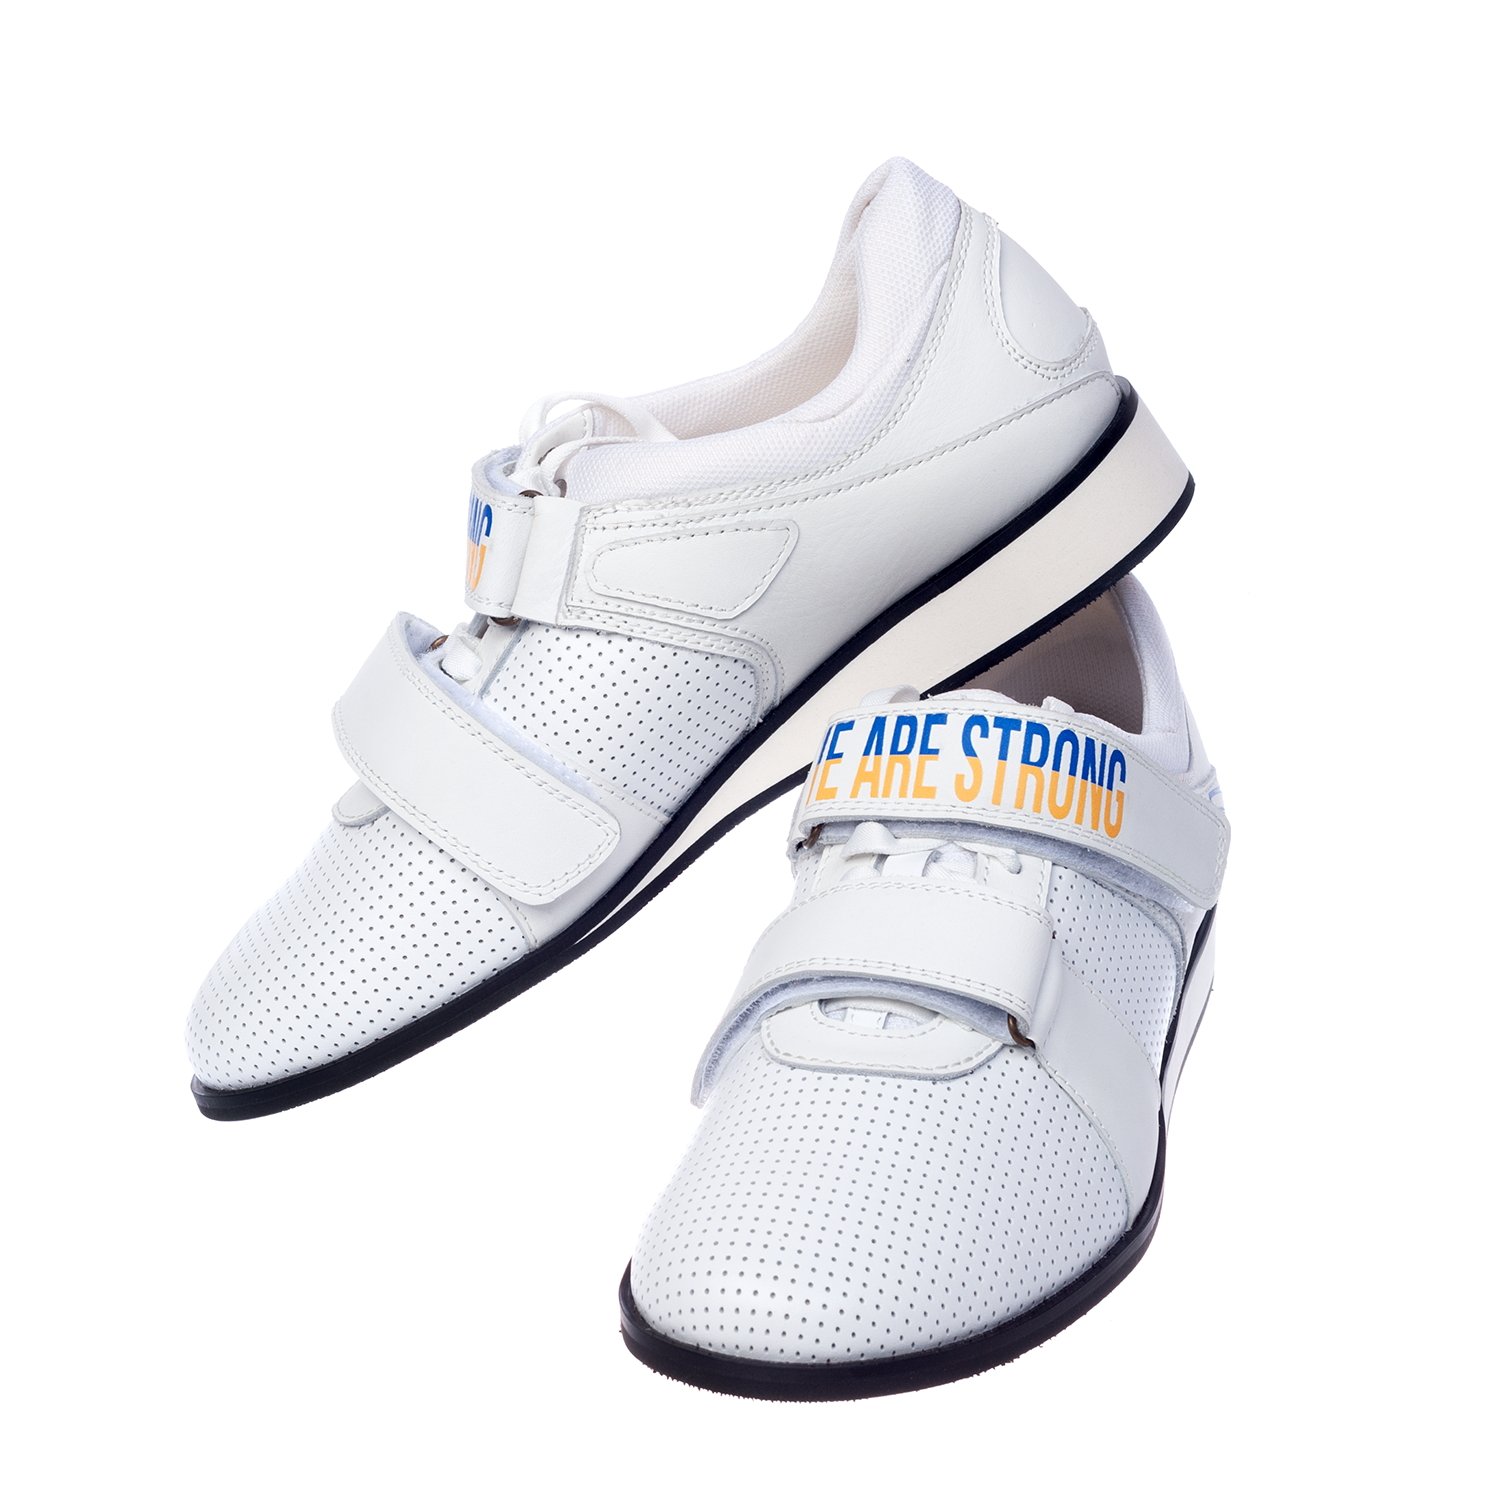 Weightlifting shoes We are strong, white, size 35 (UKR)